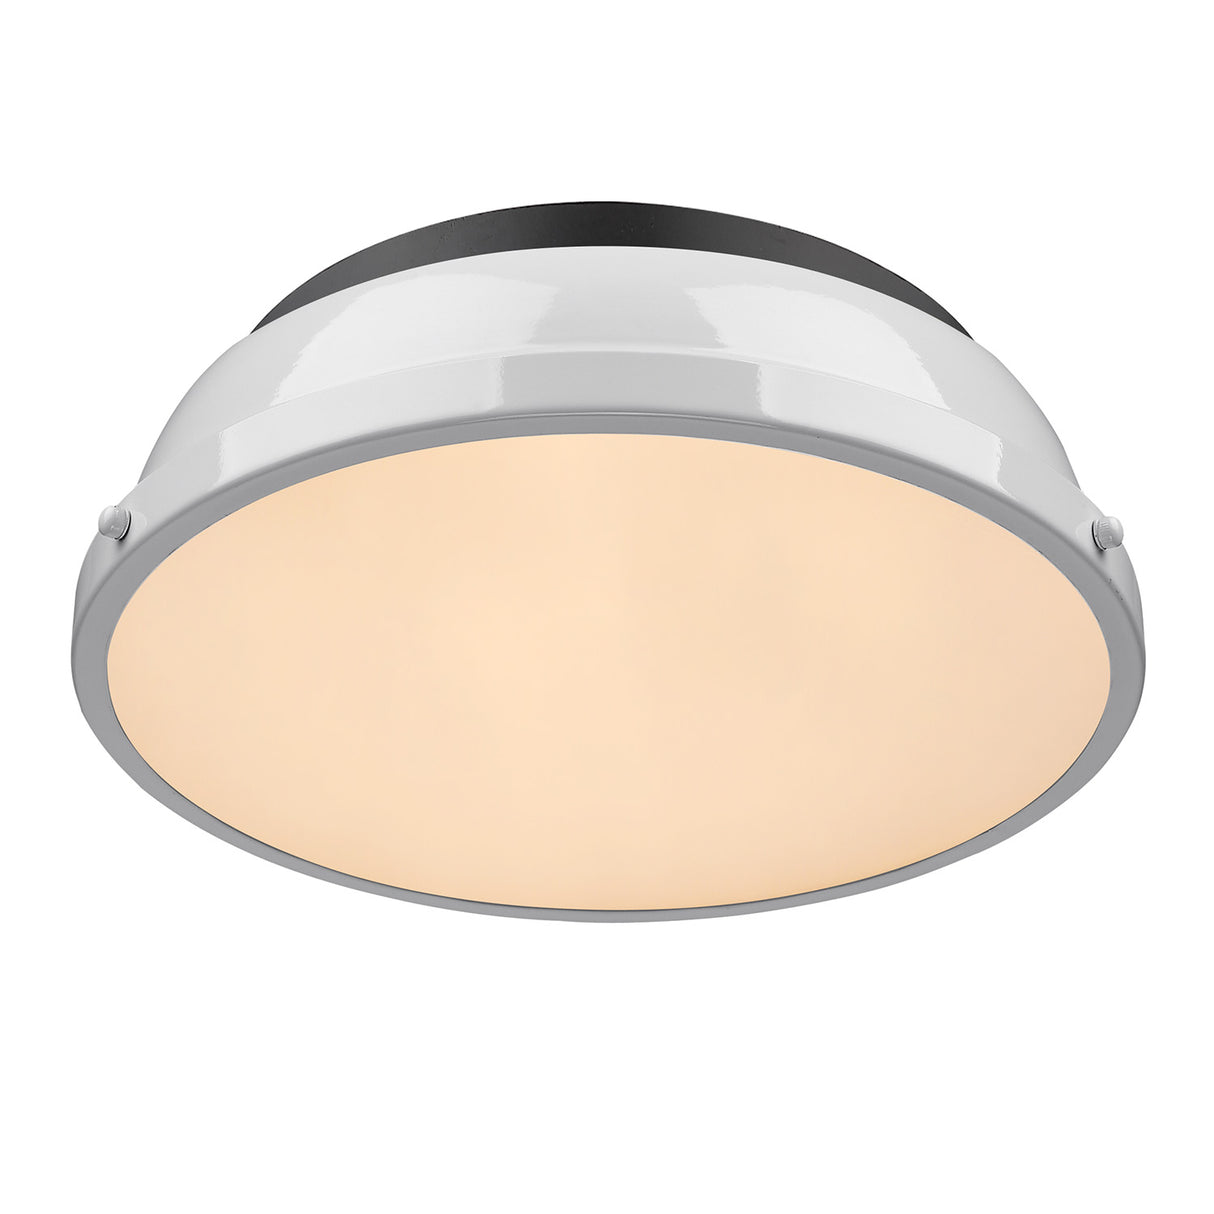 Duncan 14" Flush Mount in Matte Black with a White Shade